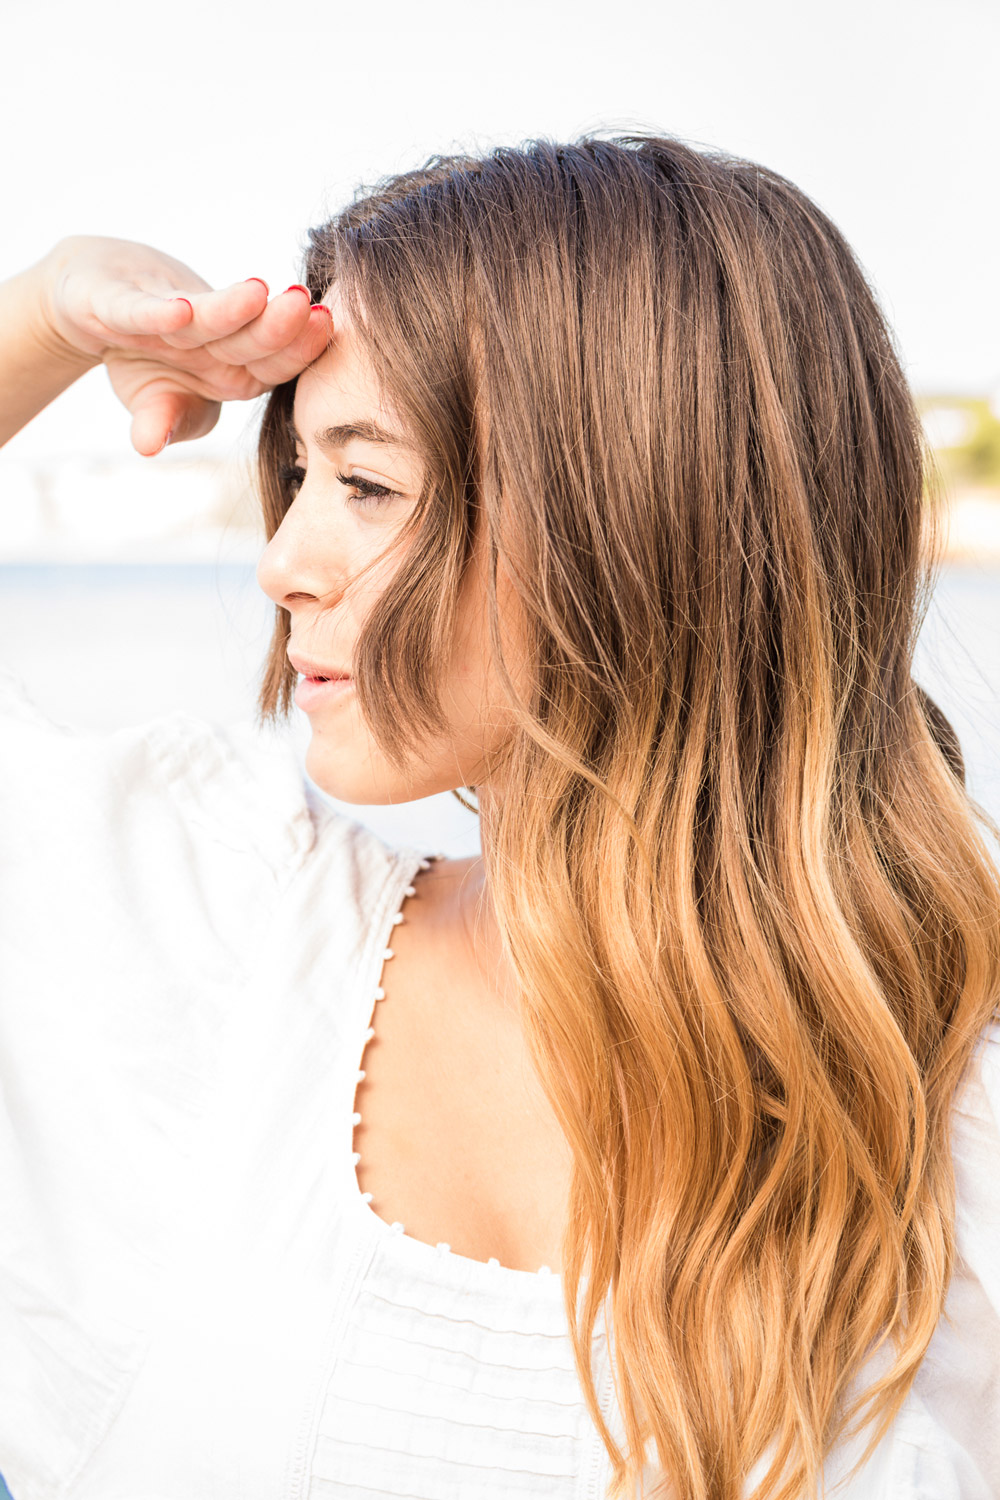 10 tips how to protect your hair from chlorine, salt water and sun - Silke  von Rolbiezki Salon